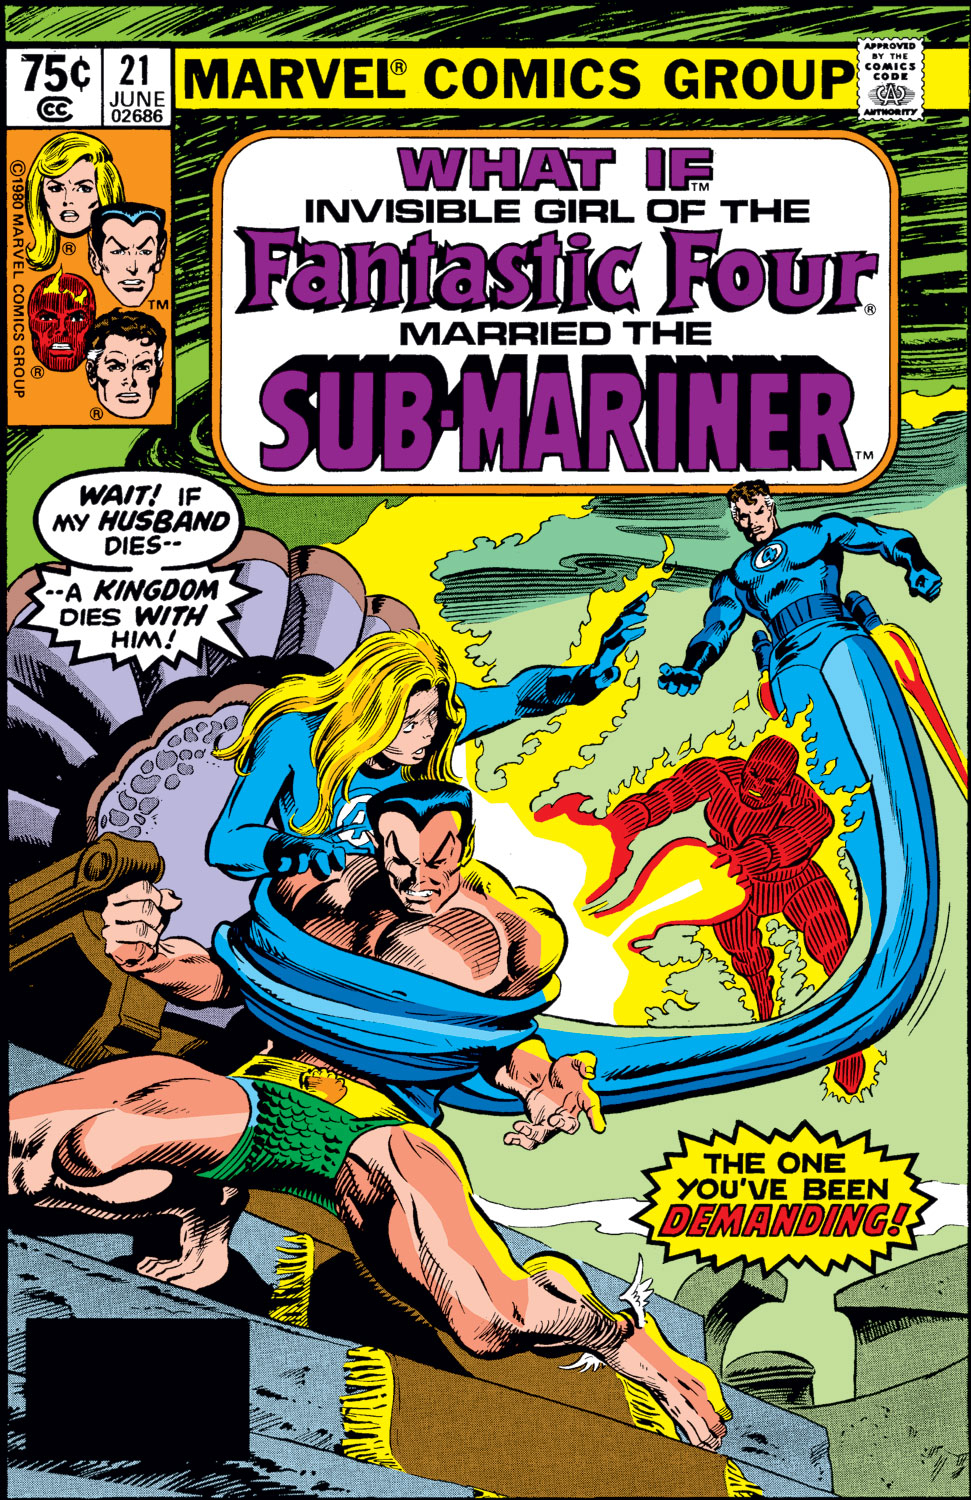 <{ $series->title }} issue 21 - Invisible Girl of the Fantastic Four married the Sub-Mariner - Page 1